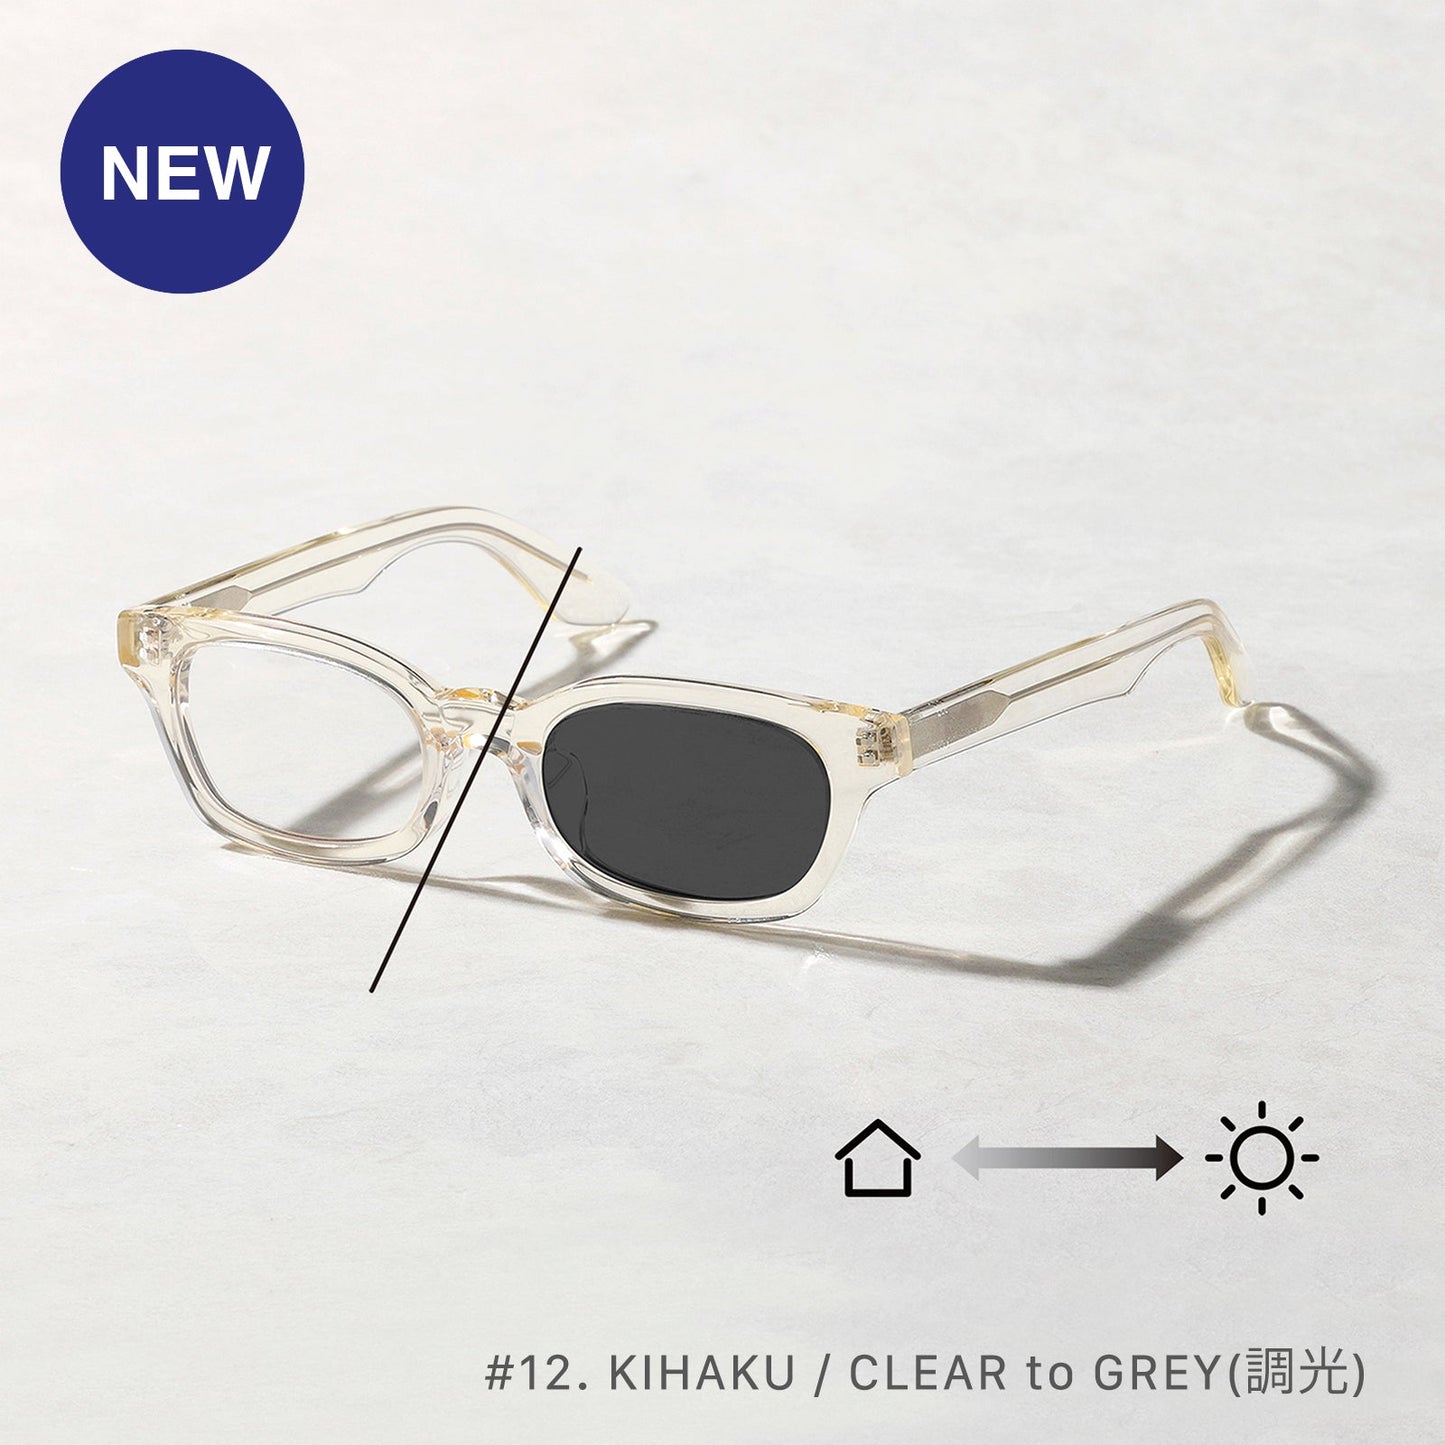 #12　CLEAR BROWN / CLEAR to GREY (調光)